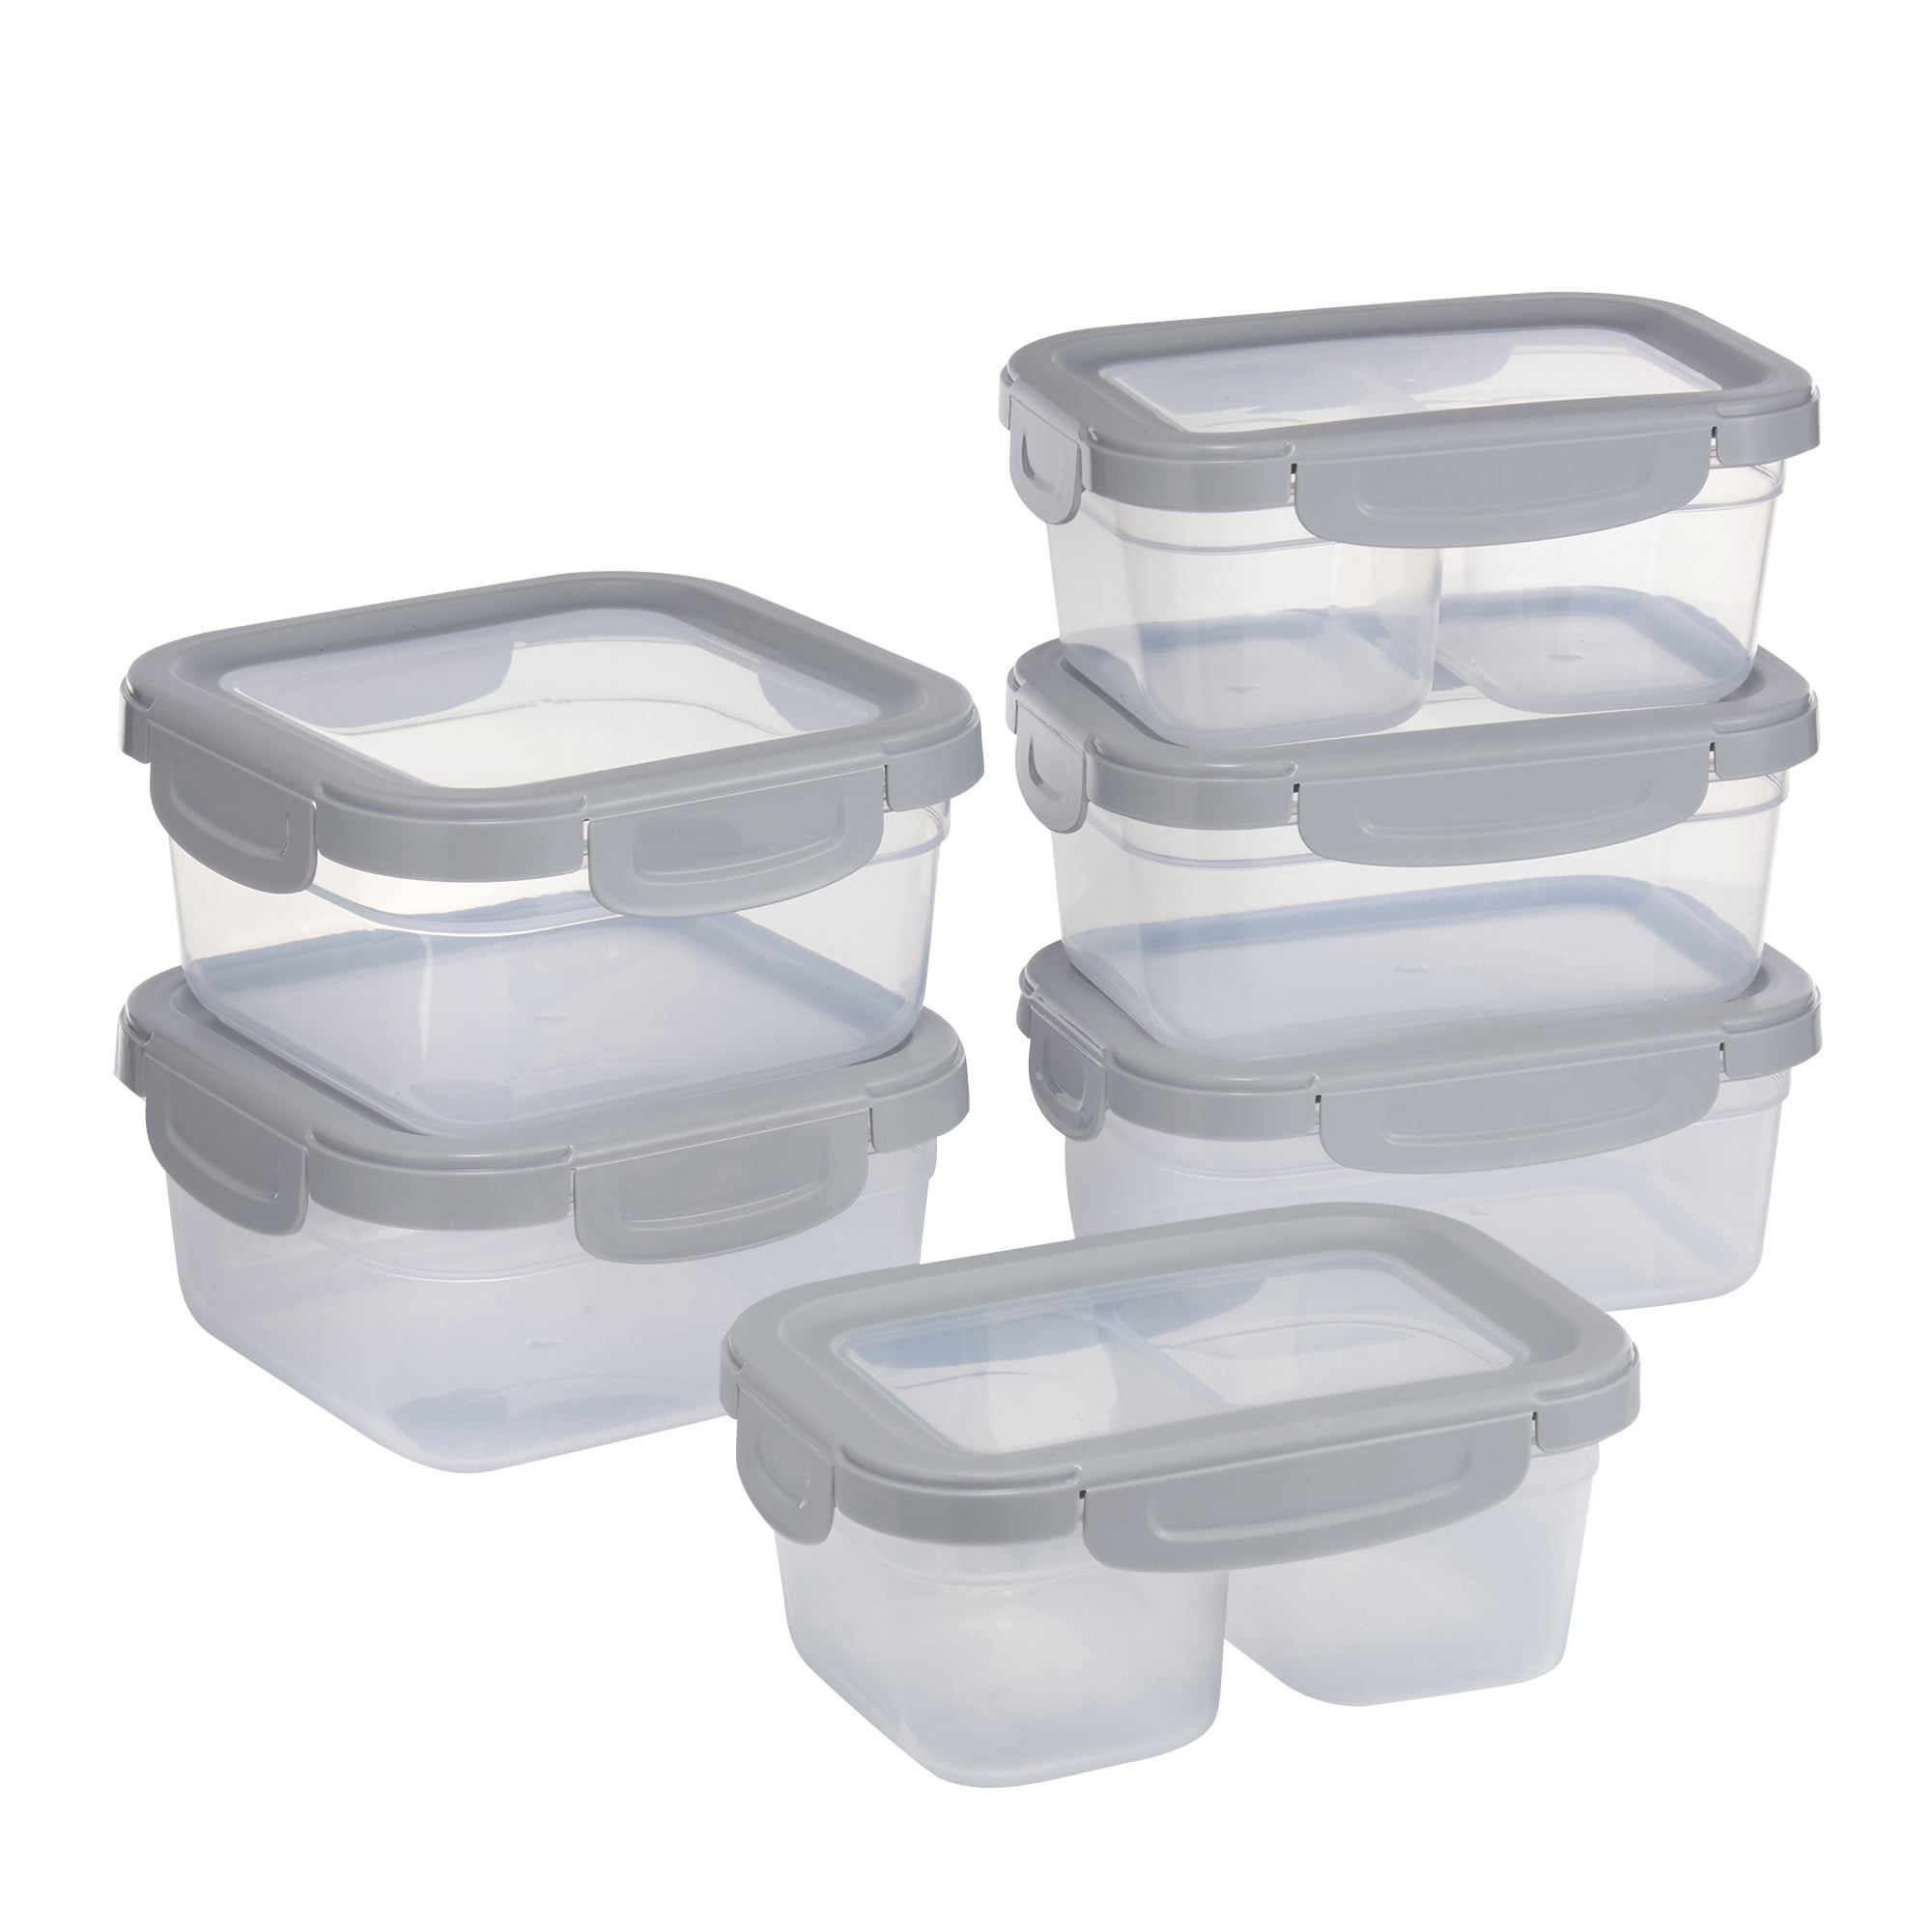 NEW Mainstays 2 Sections Meal Prep Food Storage Containers 5 Pk 10